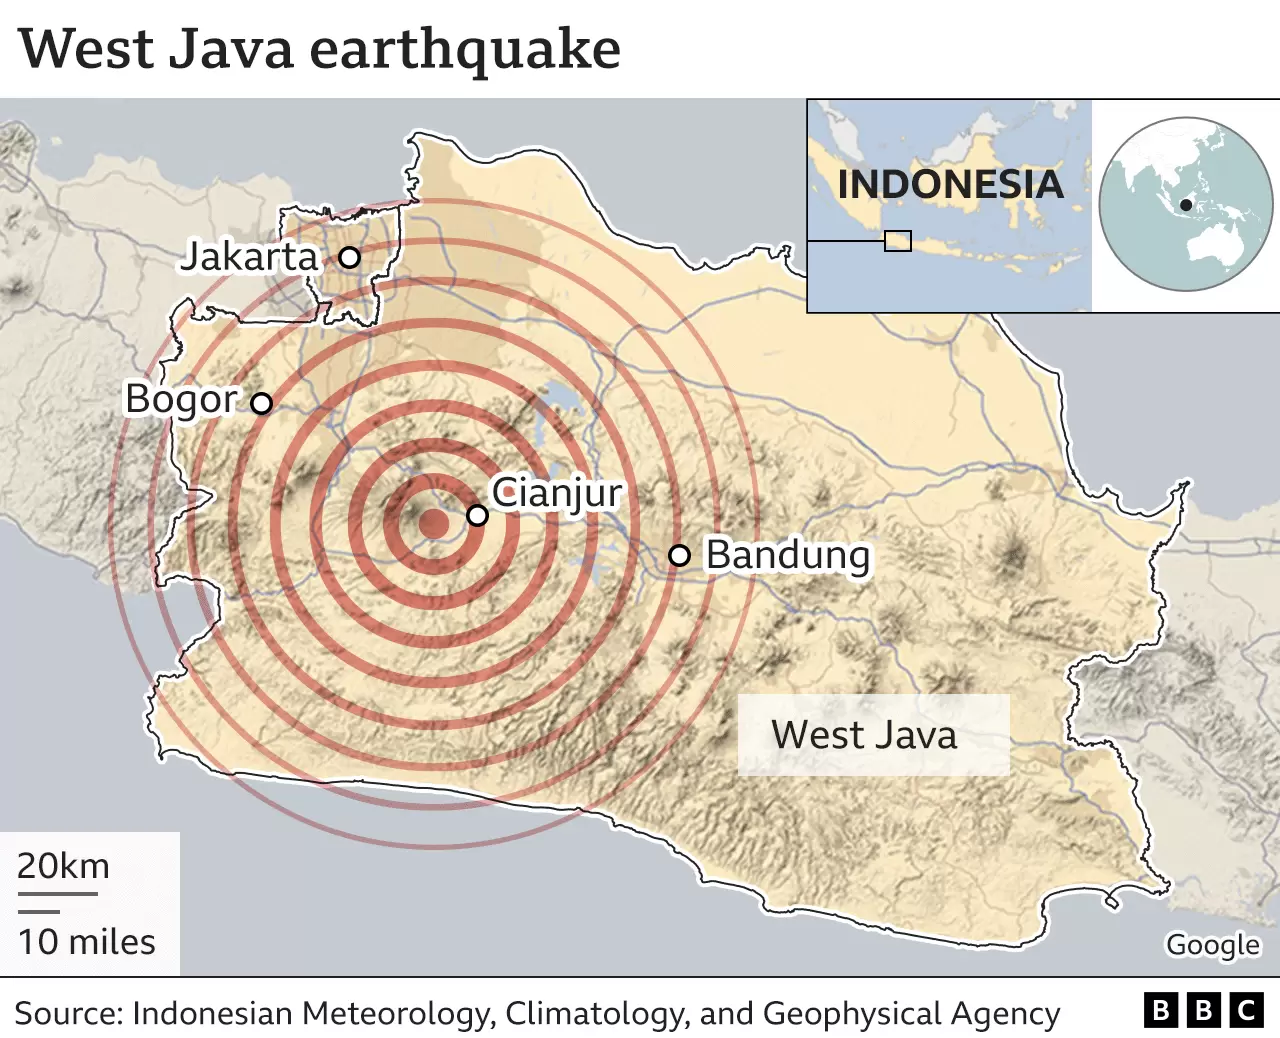 Indonesia earthquake kills as many as 268, with several wounded and missing